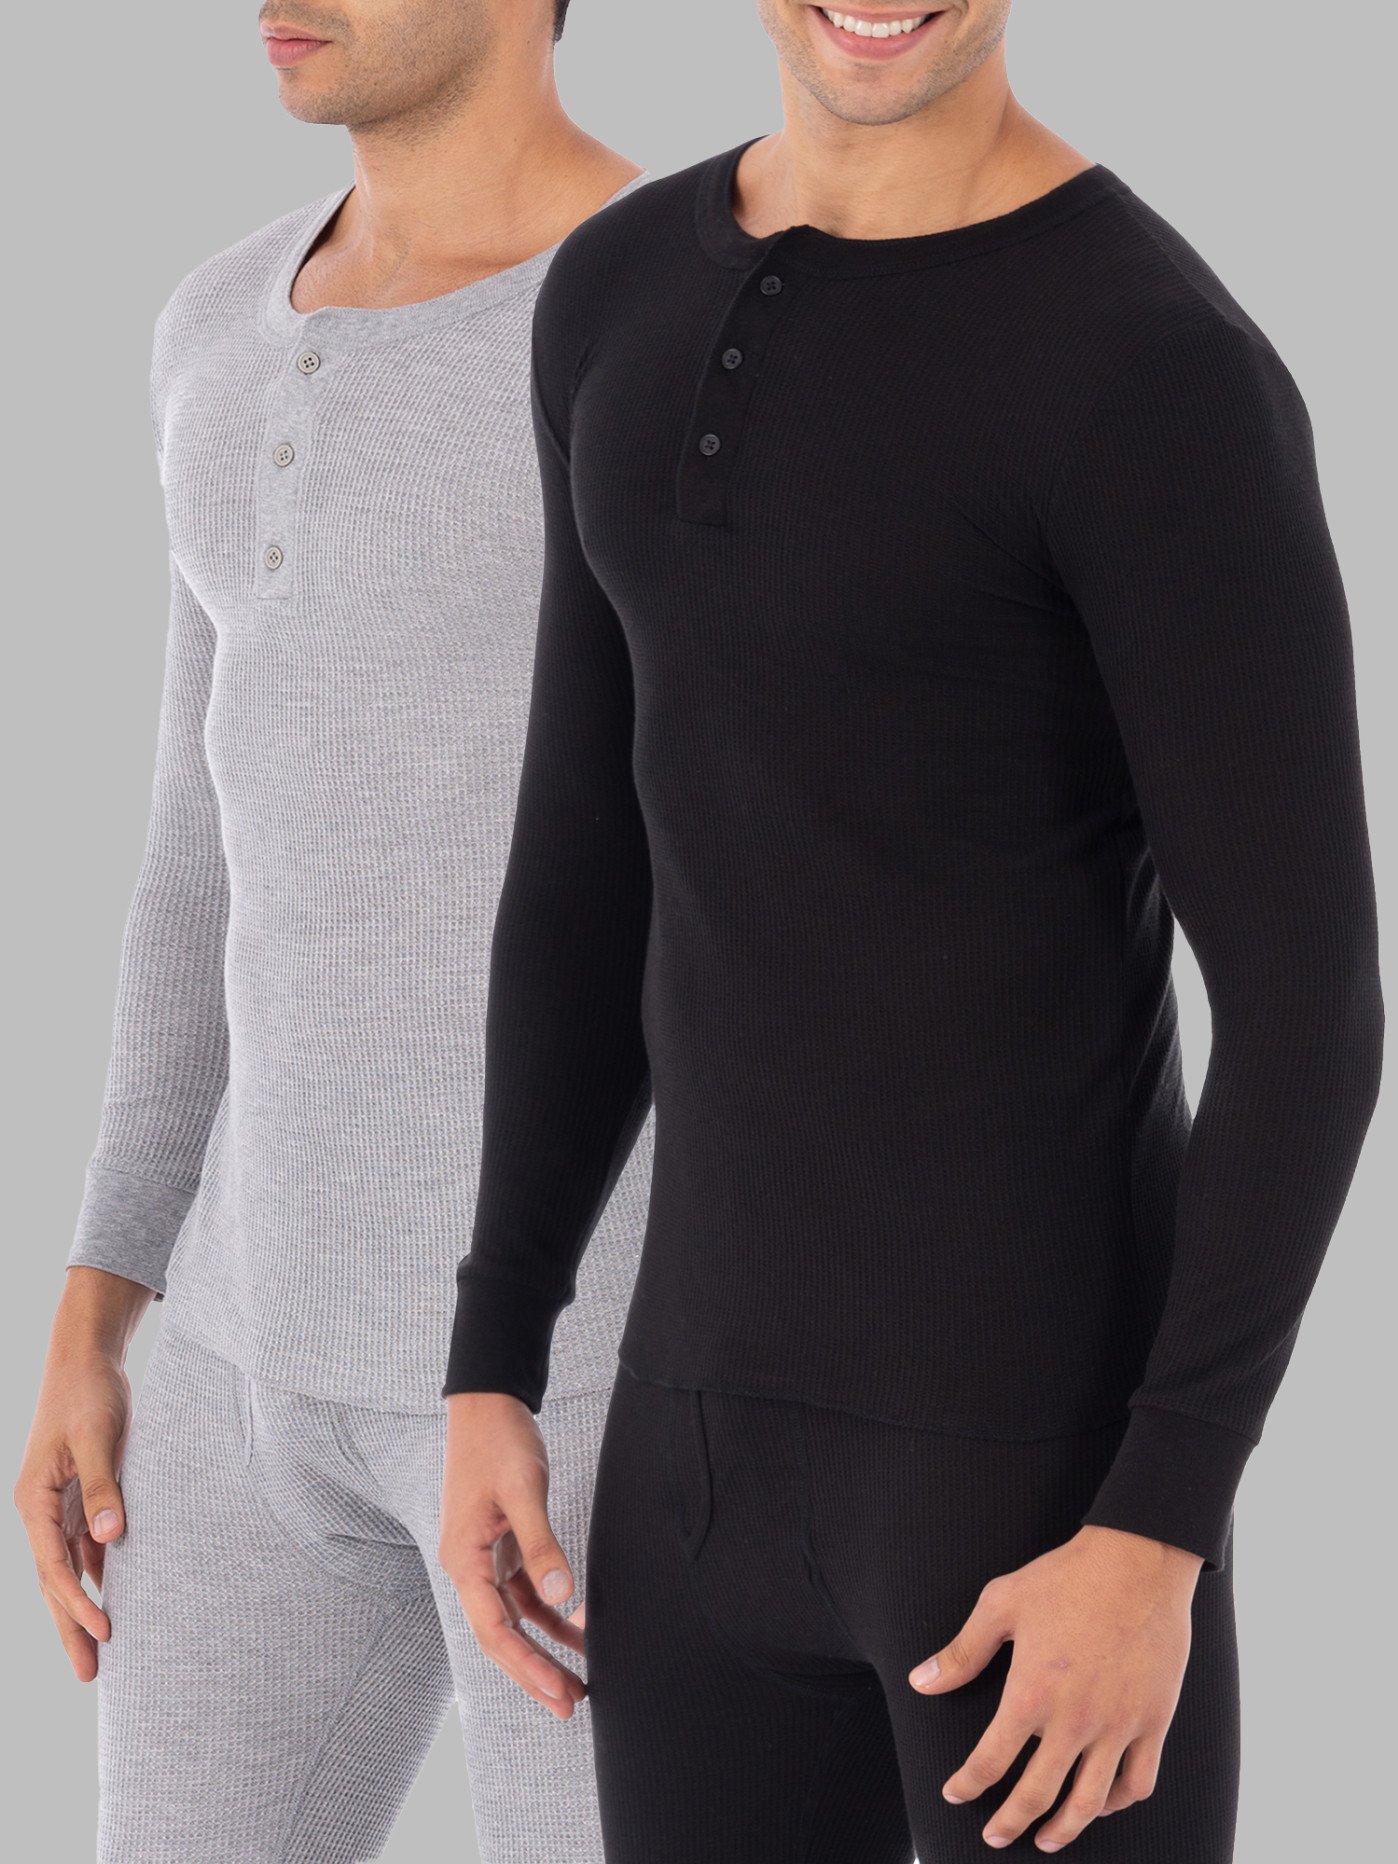 Mens Cotton Thermal Long Johns With Comfort Pouch Warm Winter